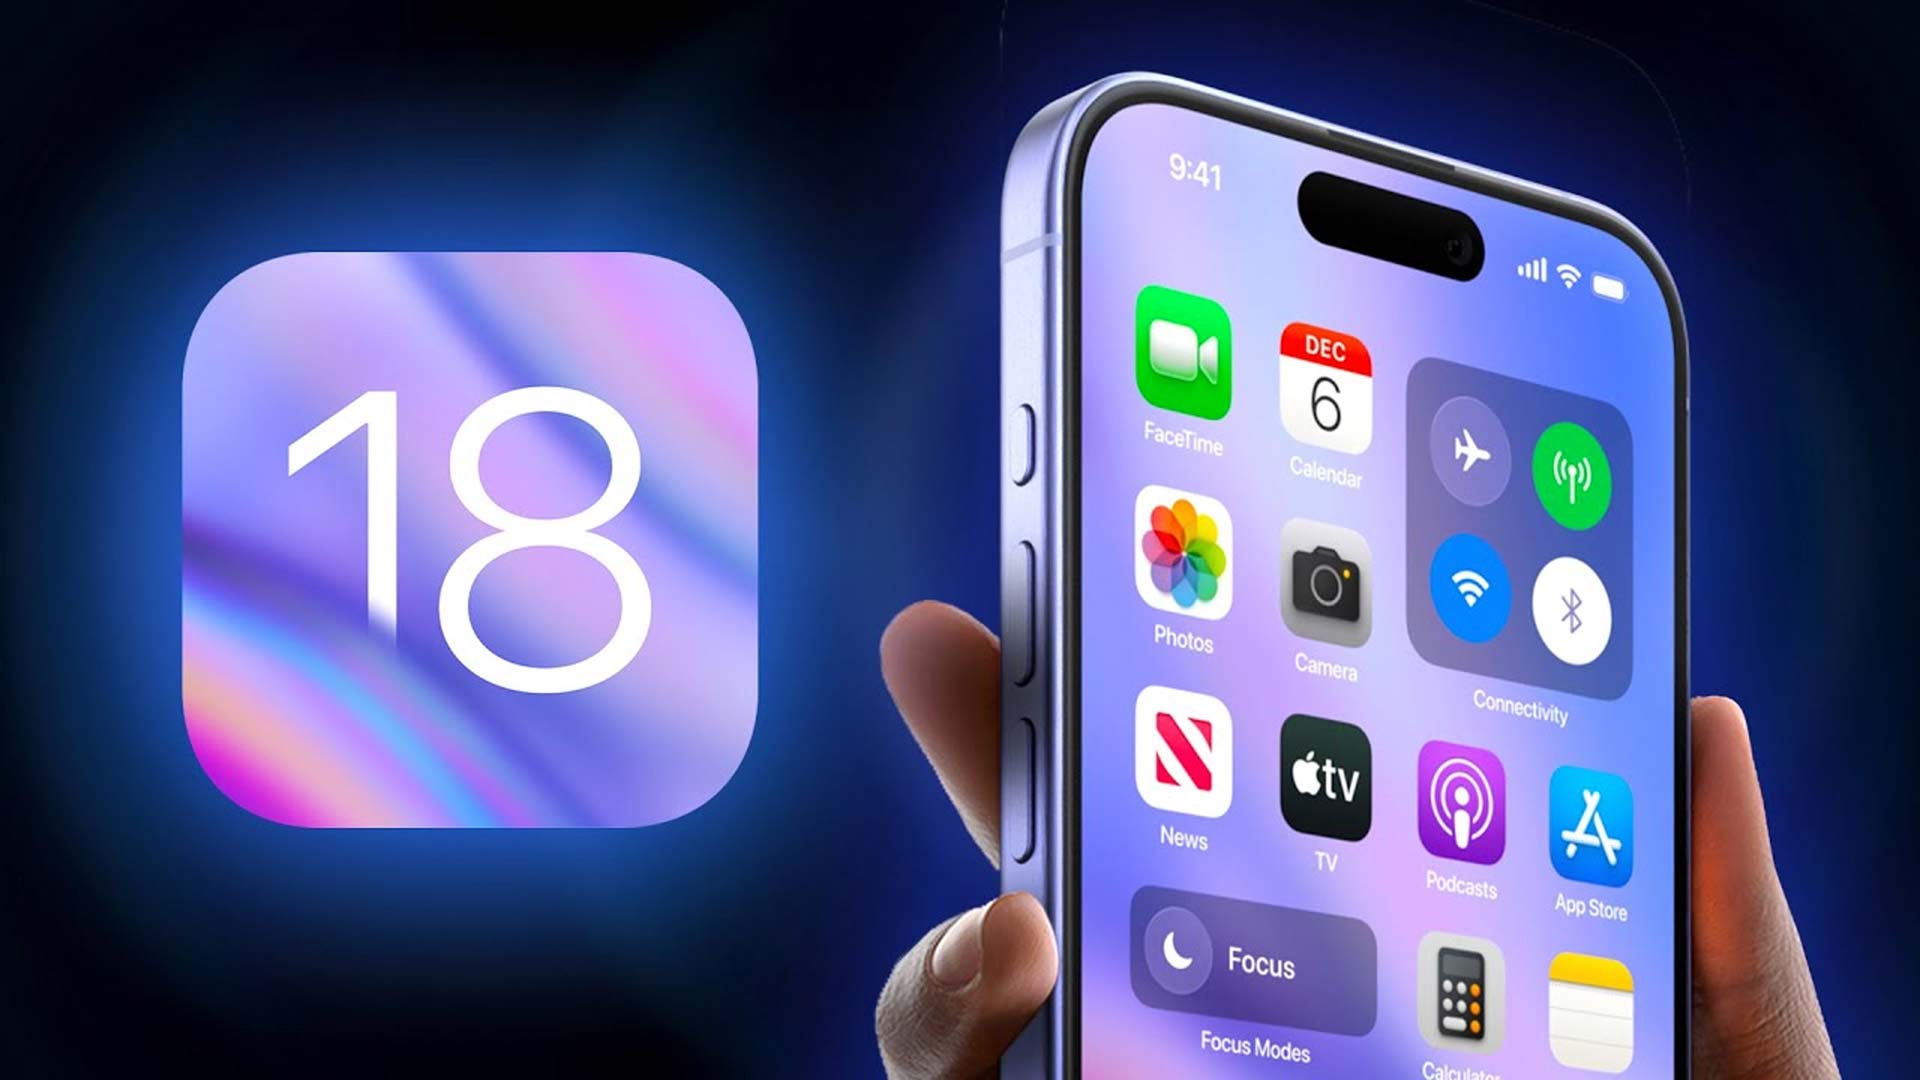 iOS 18 will allow you to record and decrypt phone calls